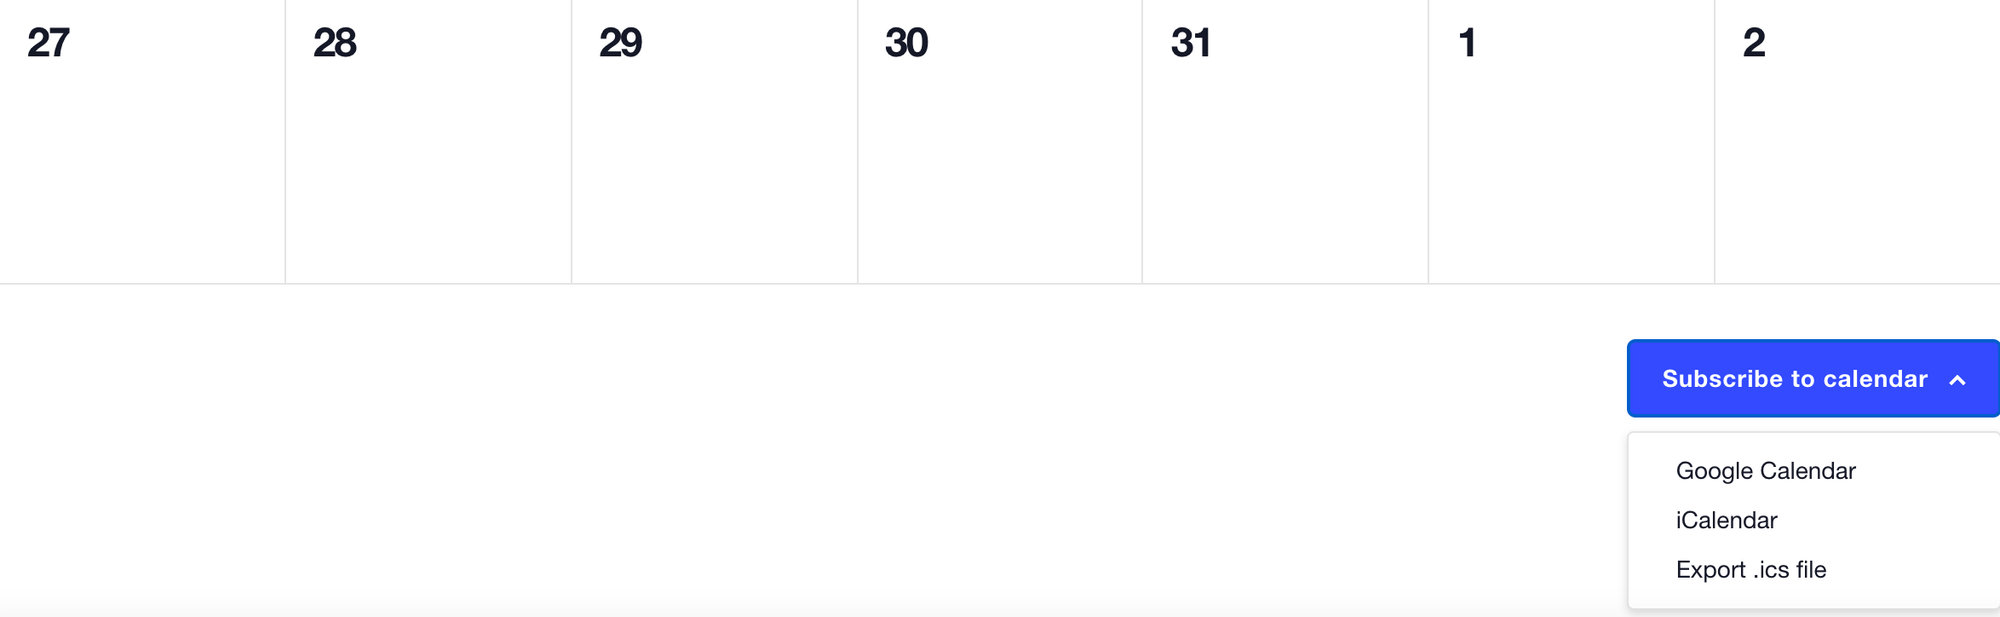 Subscribe to a WordPress Calendar in Month View